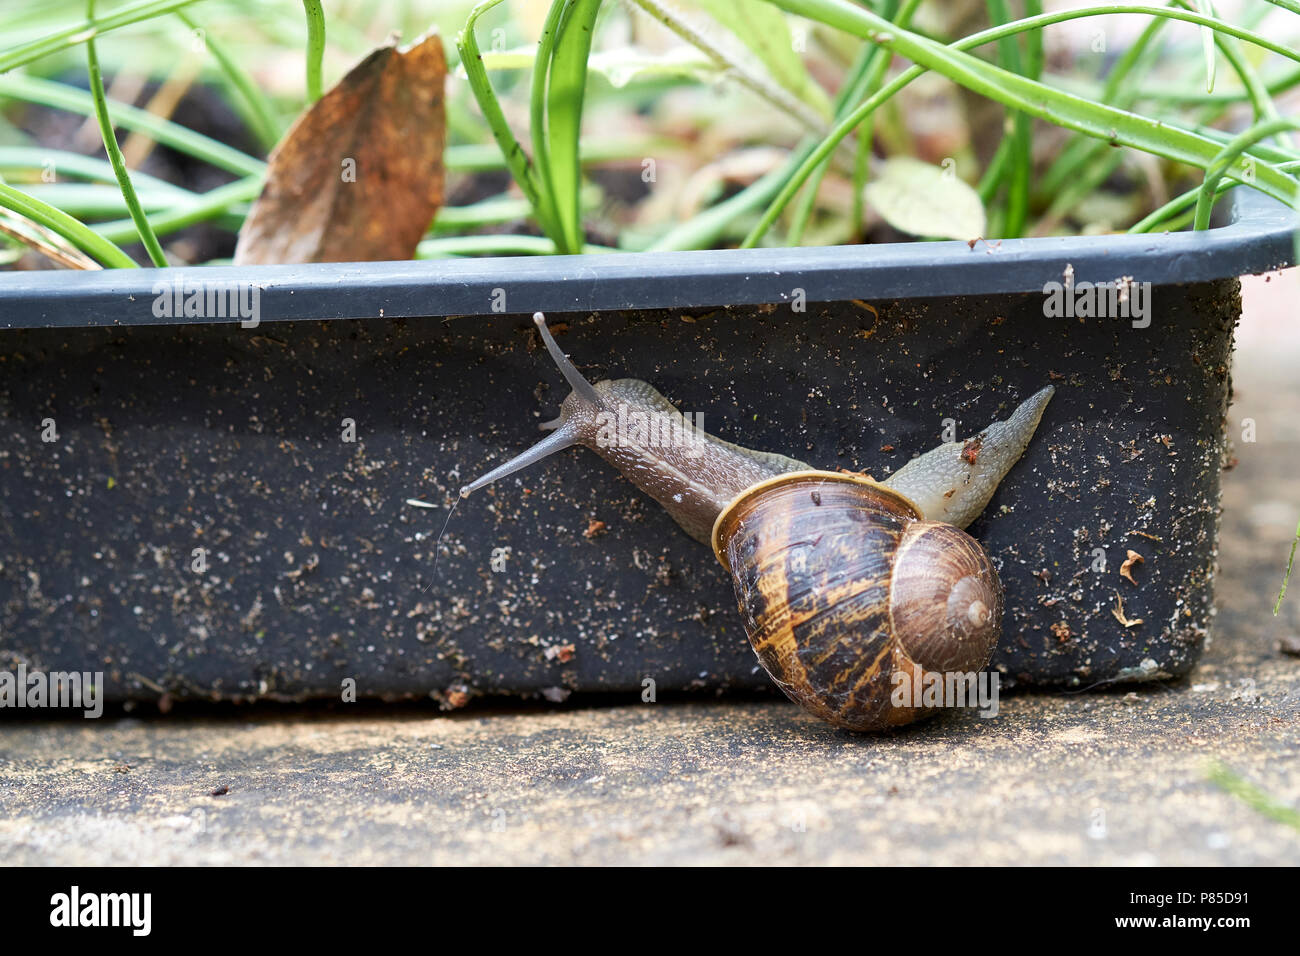 A Garden Snail, Helix aspersa, on the side of a black plastic seed tray containing garden plants, UK. Stock Photo